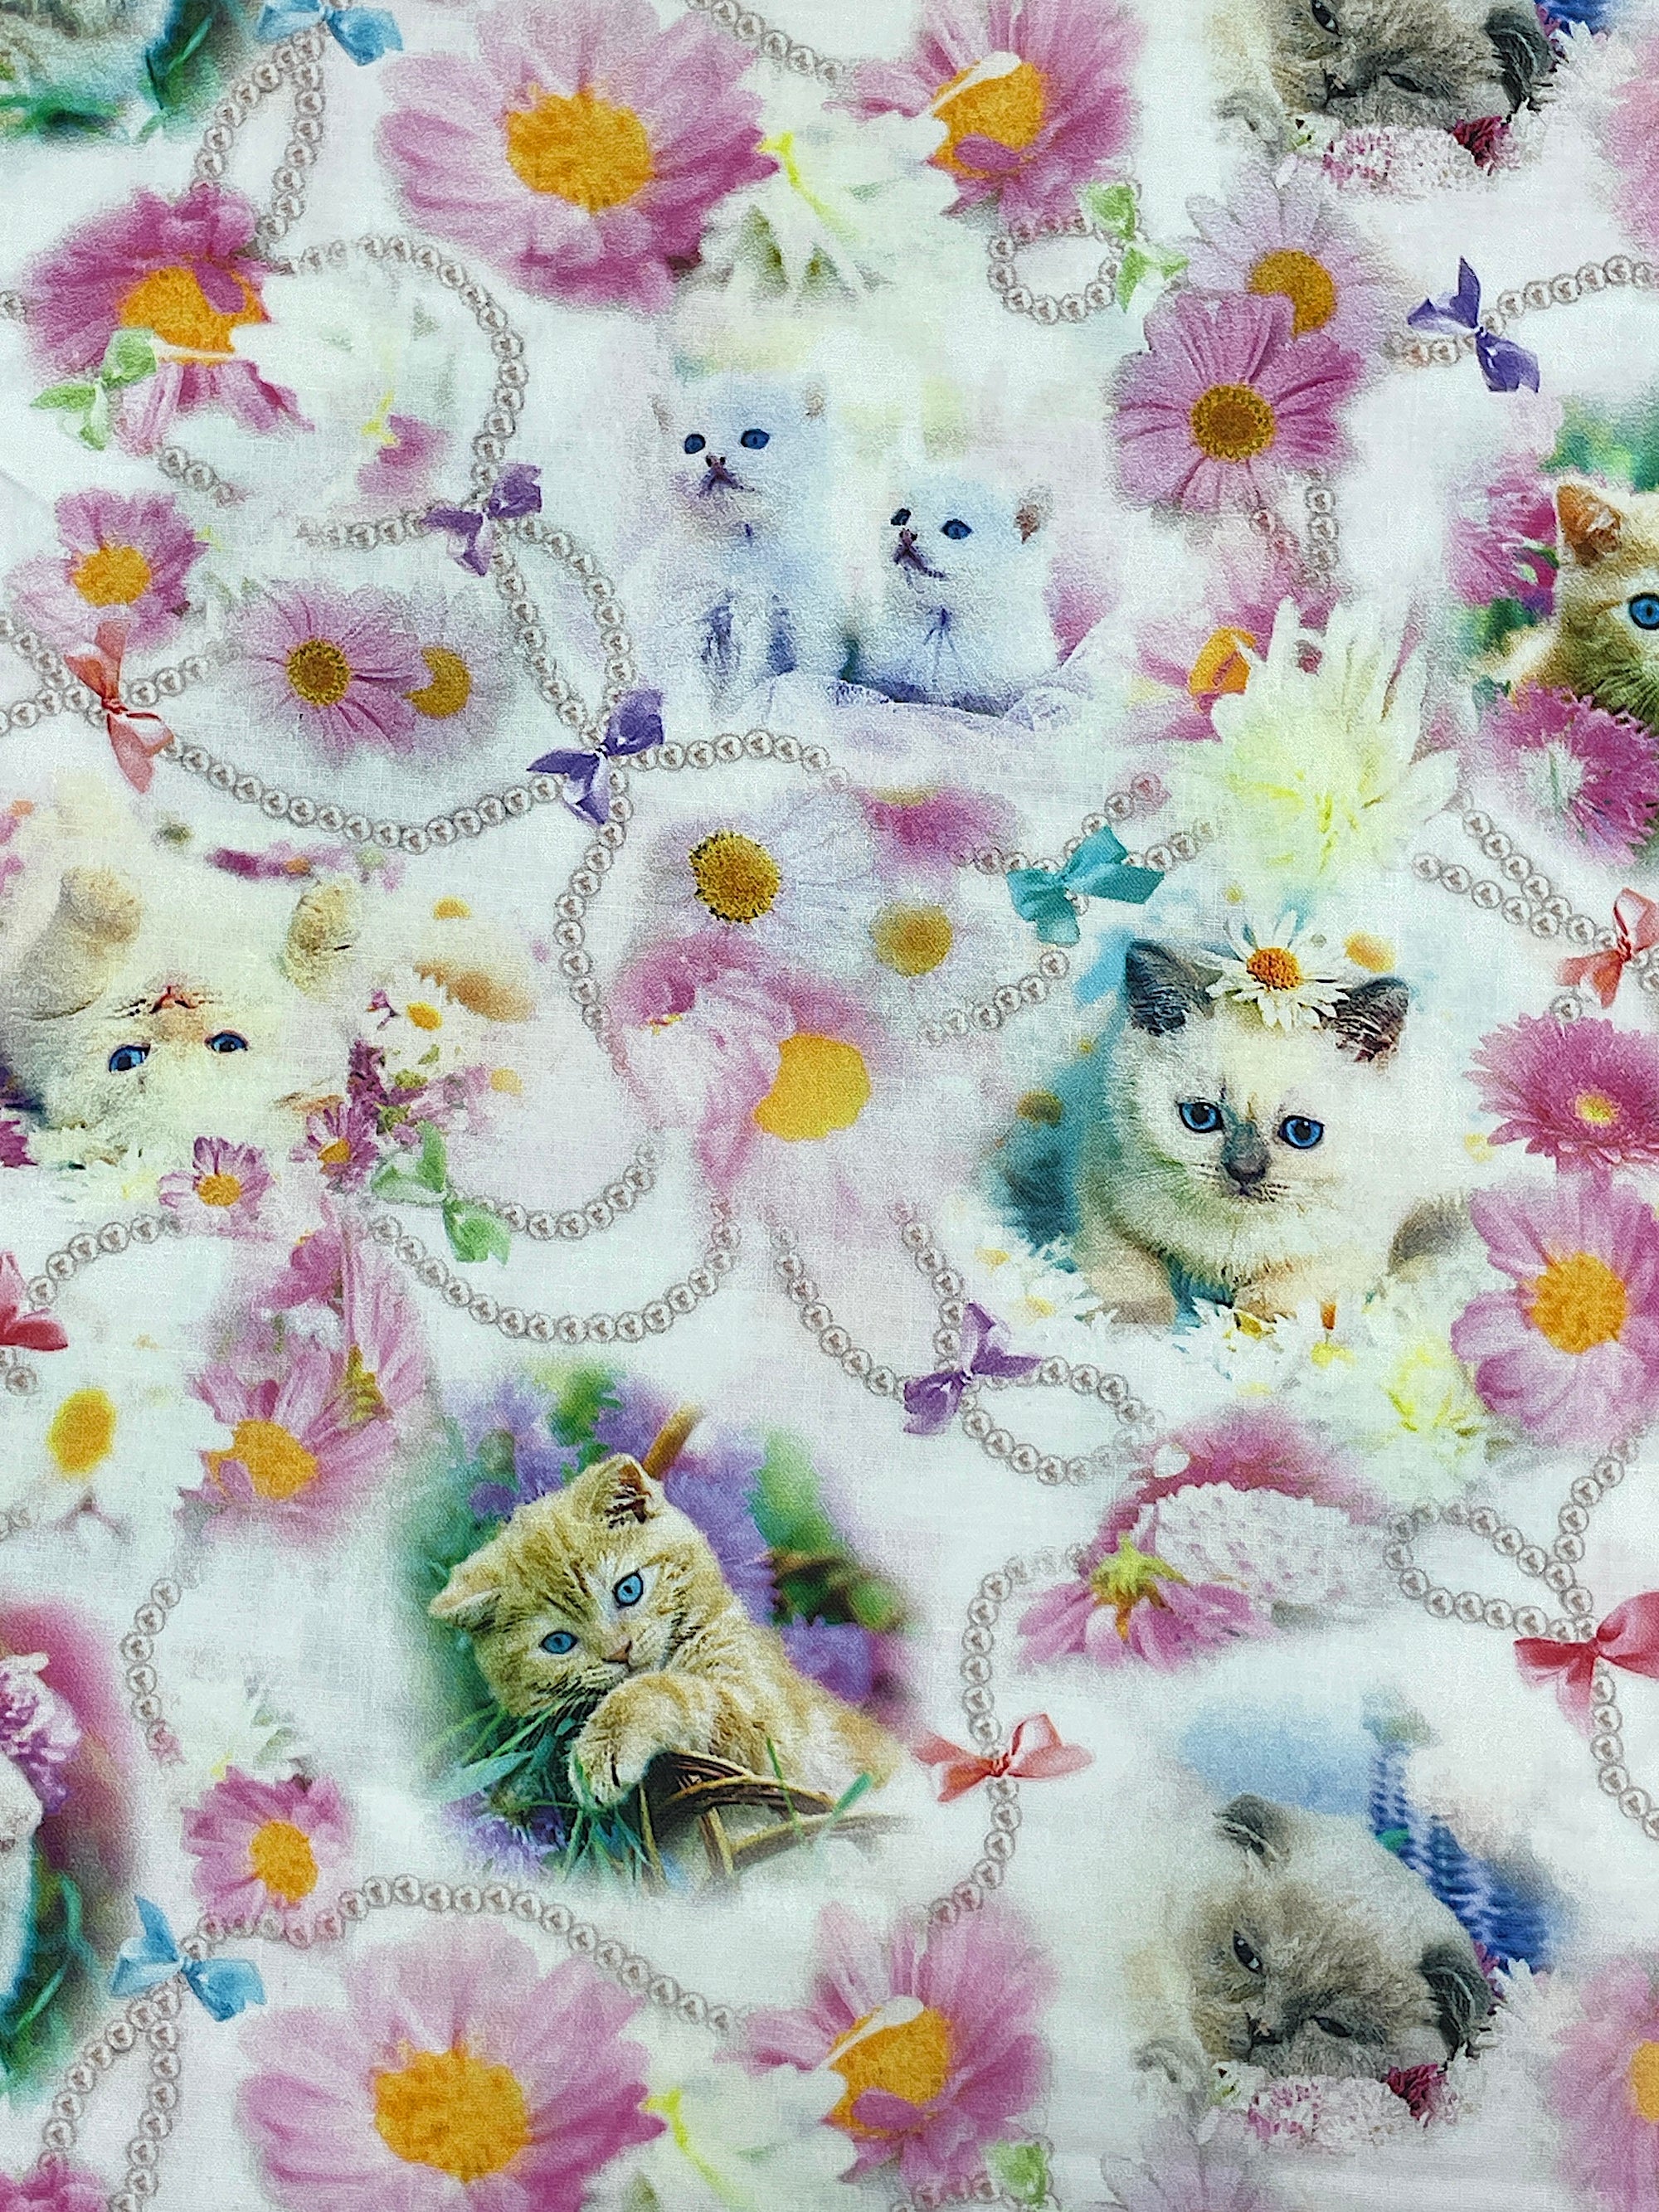 Kittens surrounded with flowers and beads.